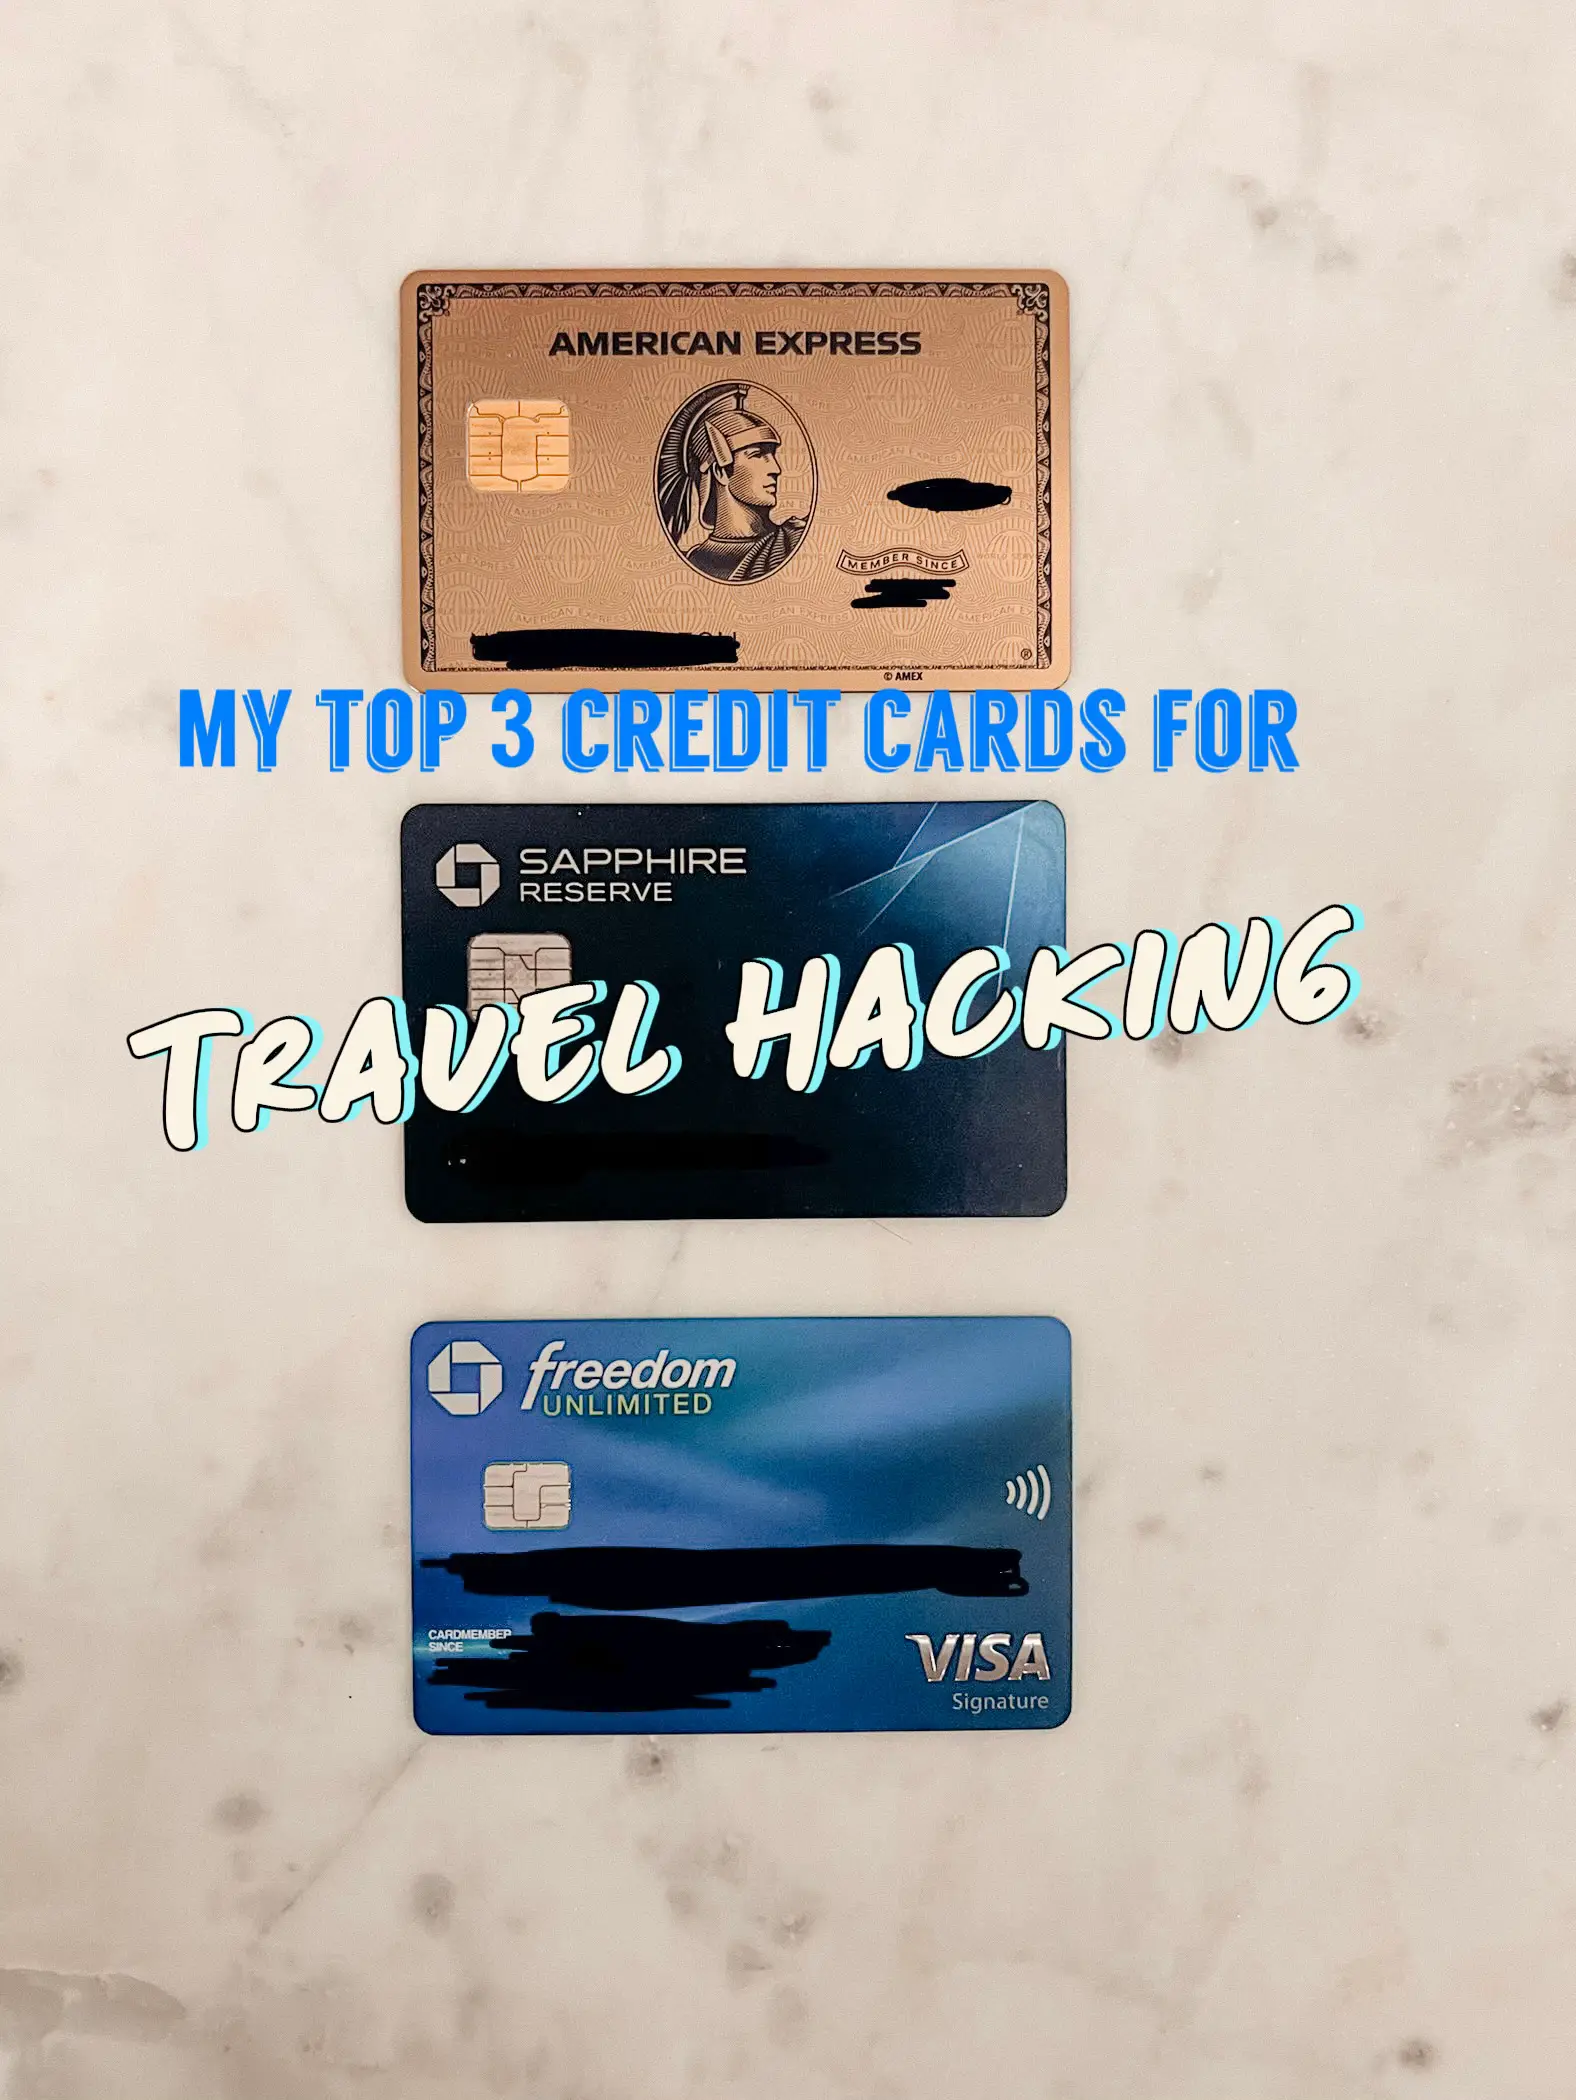 Here's my little hack for using every last cent on a Visa/Amex